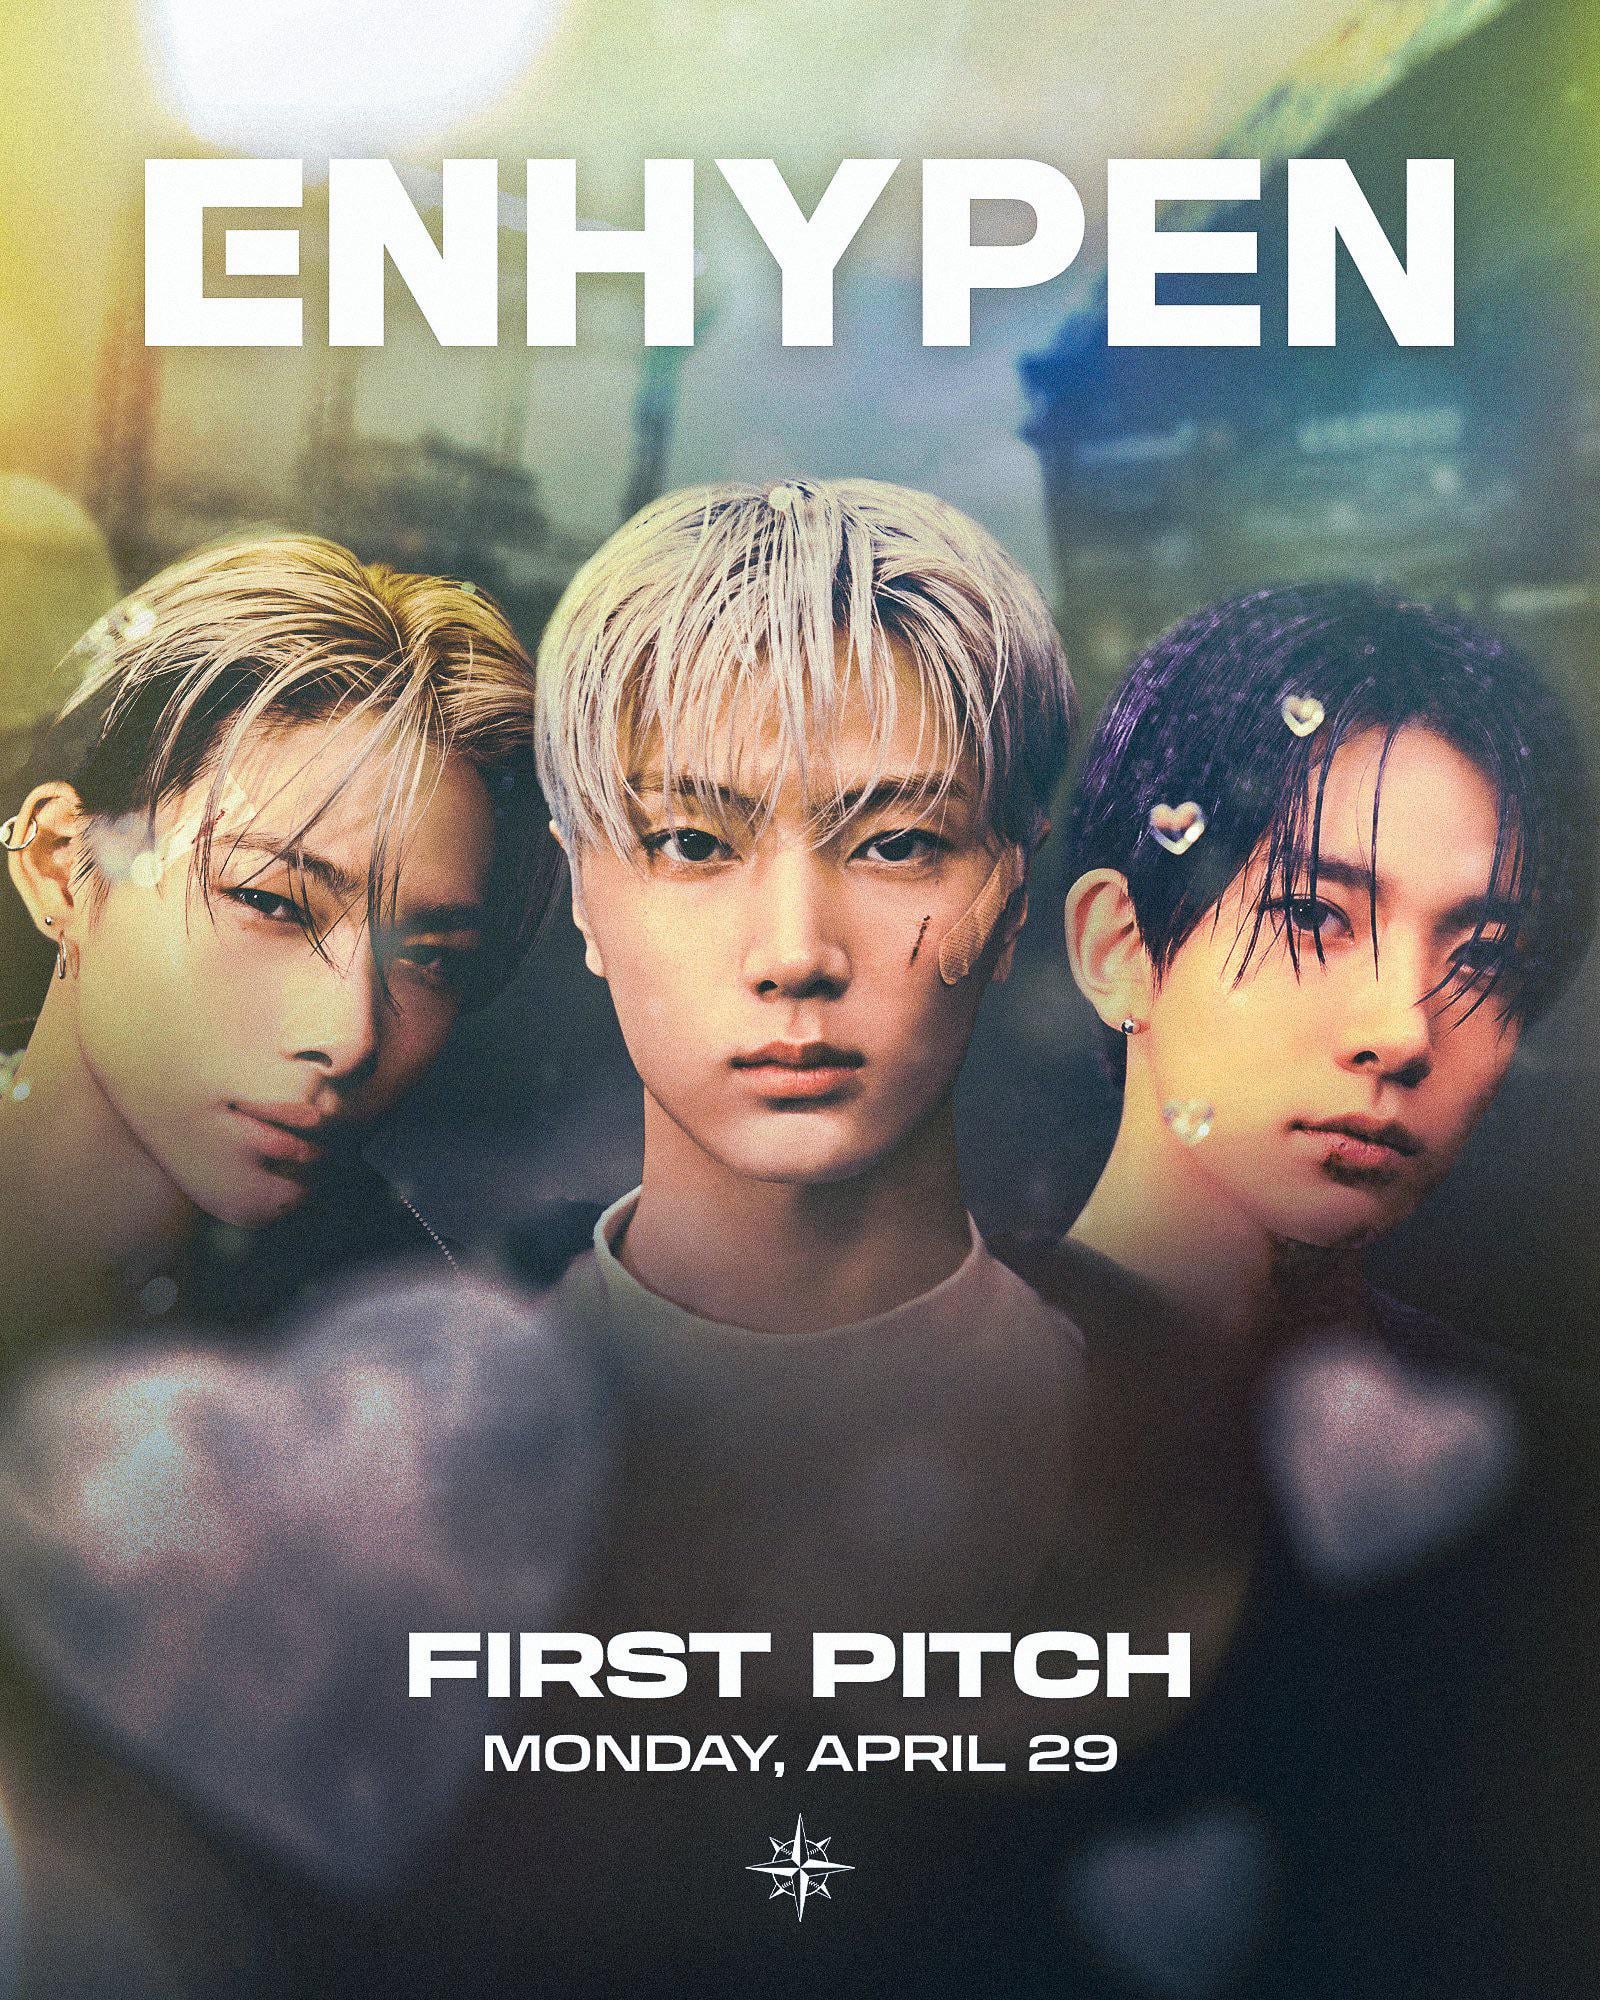 240419 Jay, Heeseung, and Ni-ki will be throwing the first pitch of the Seattle Mariners game on April 29th